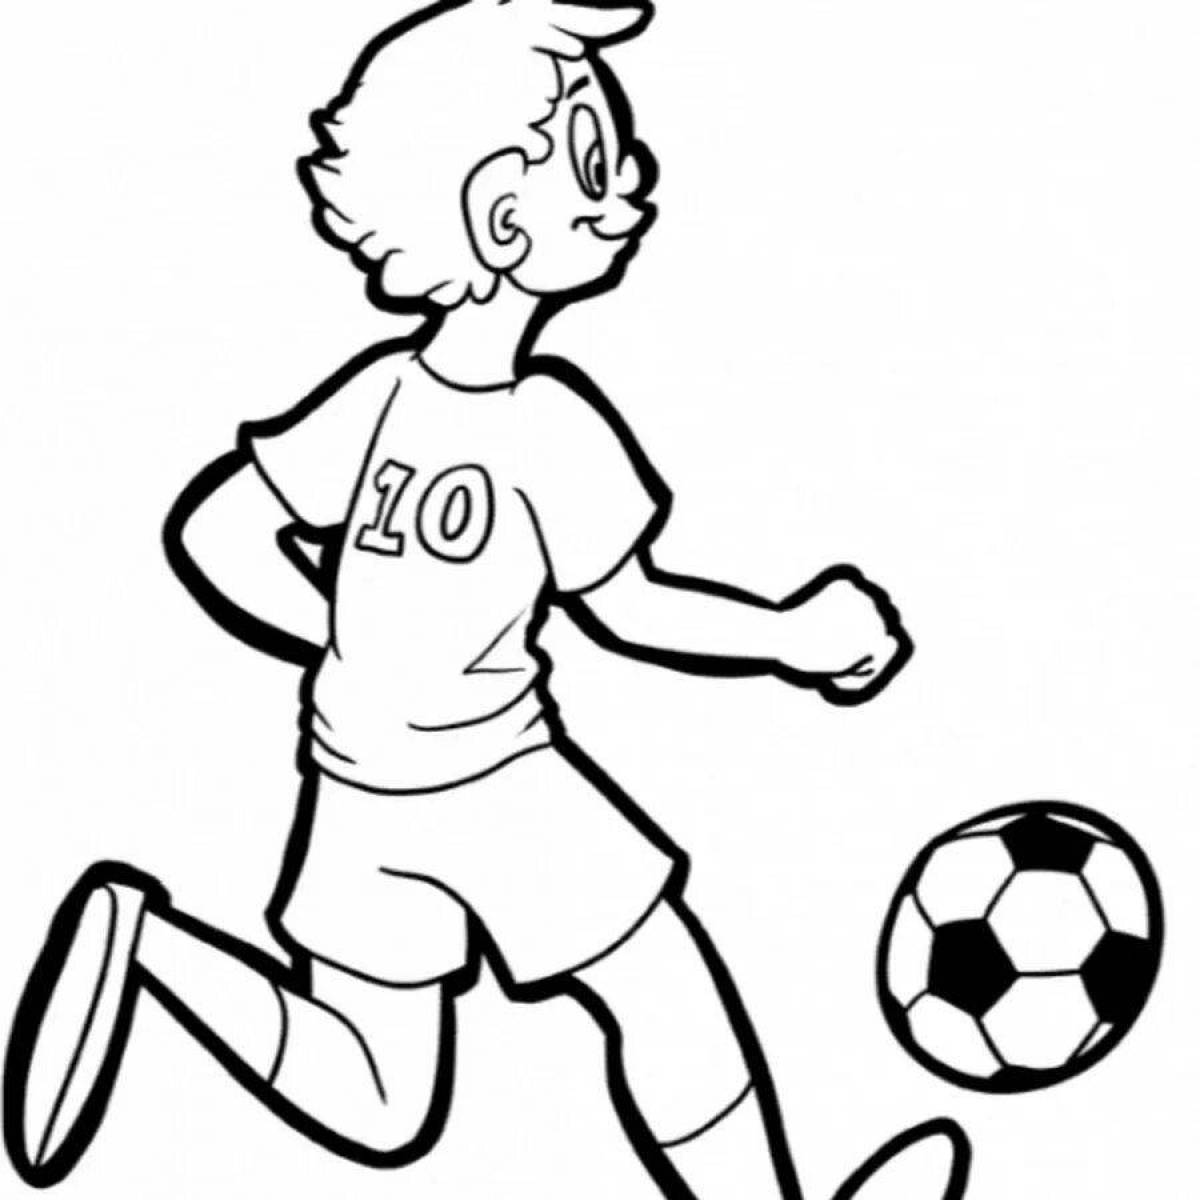 Courageous football player coloring page